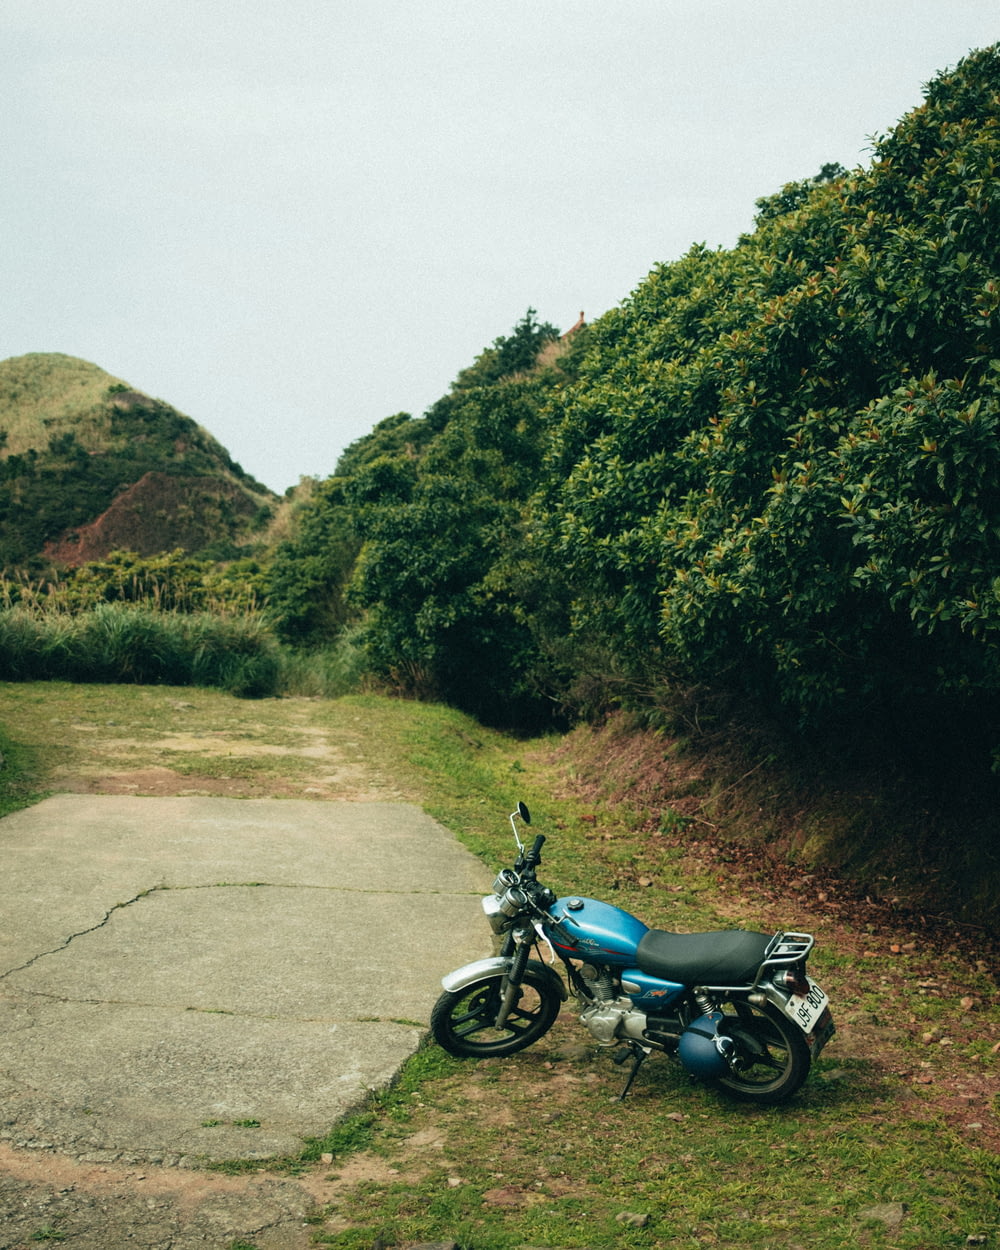 a blue motorcycle parked on the side of a road